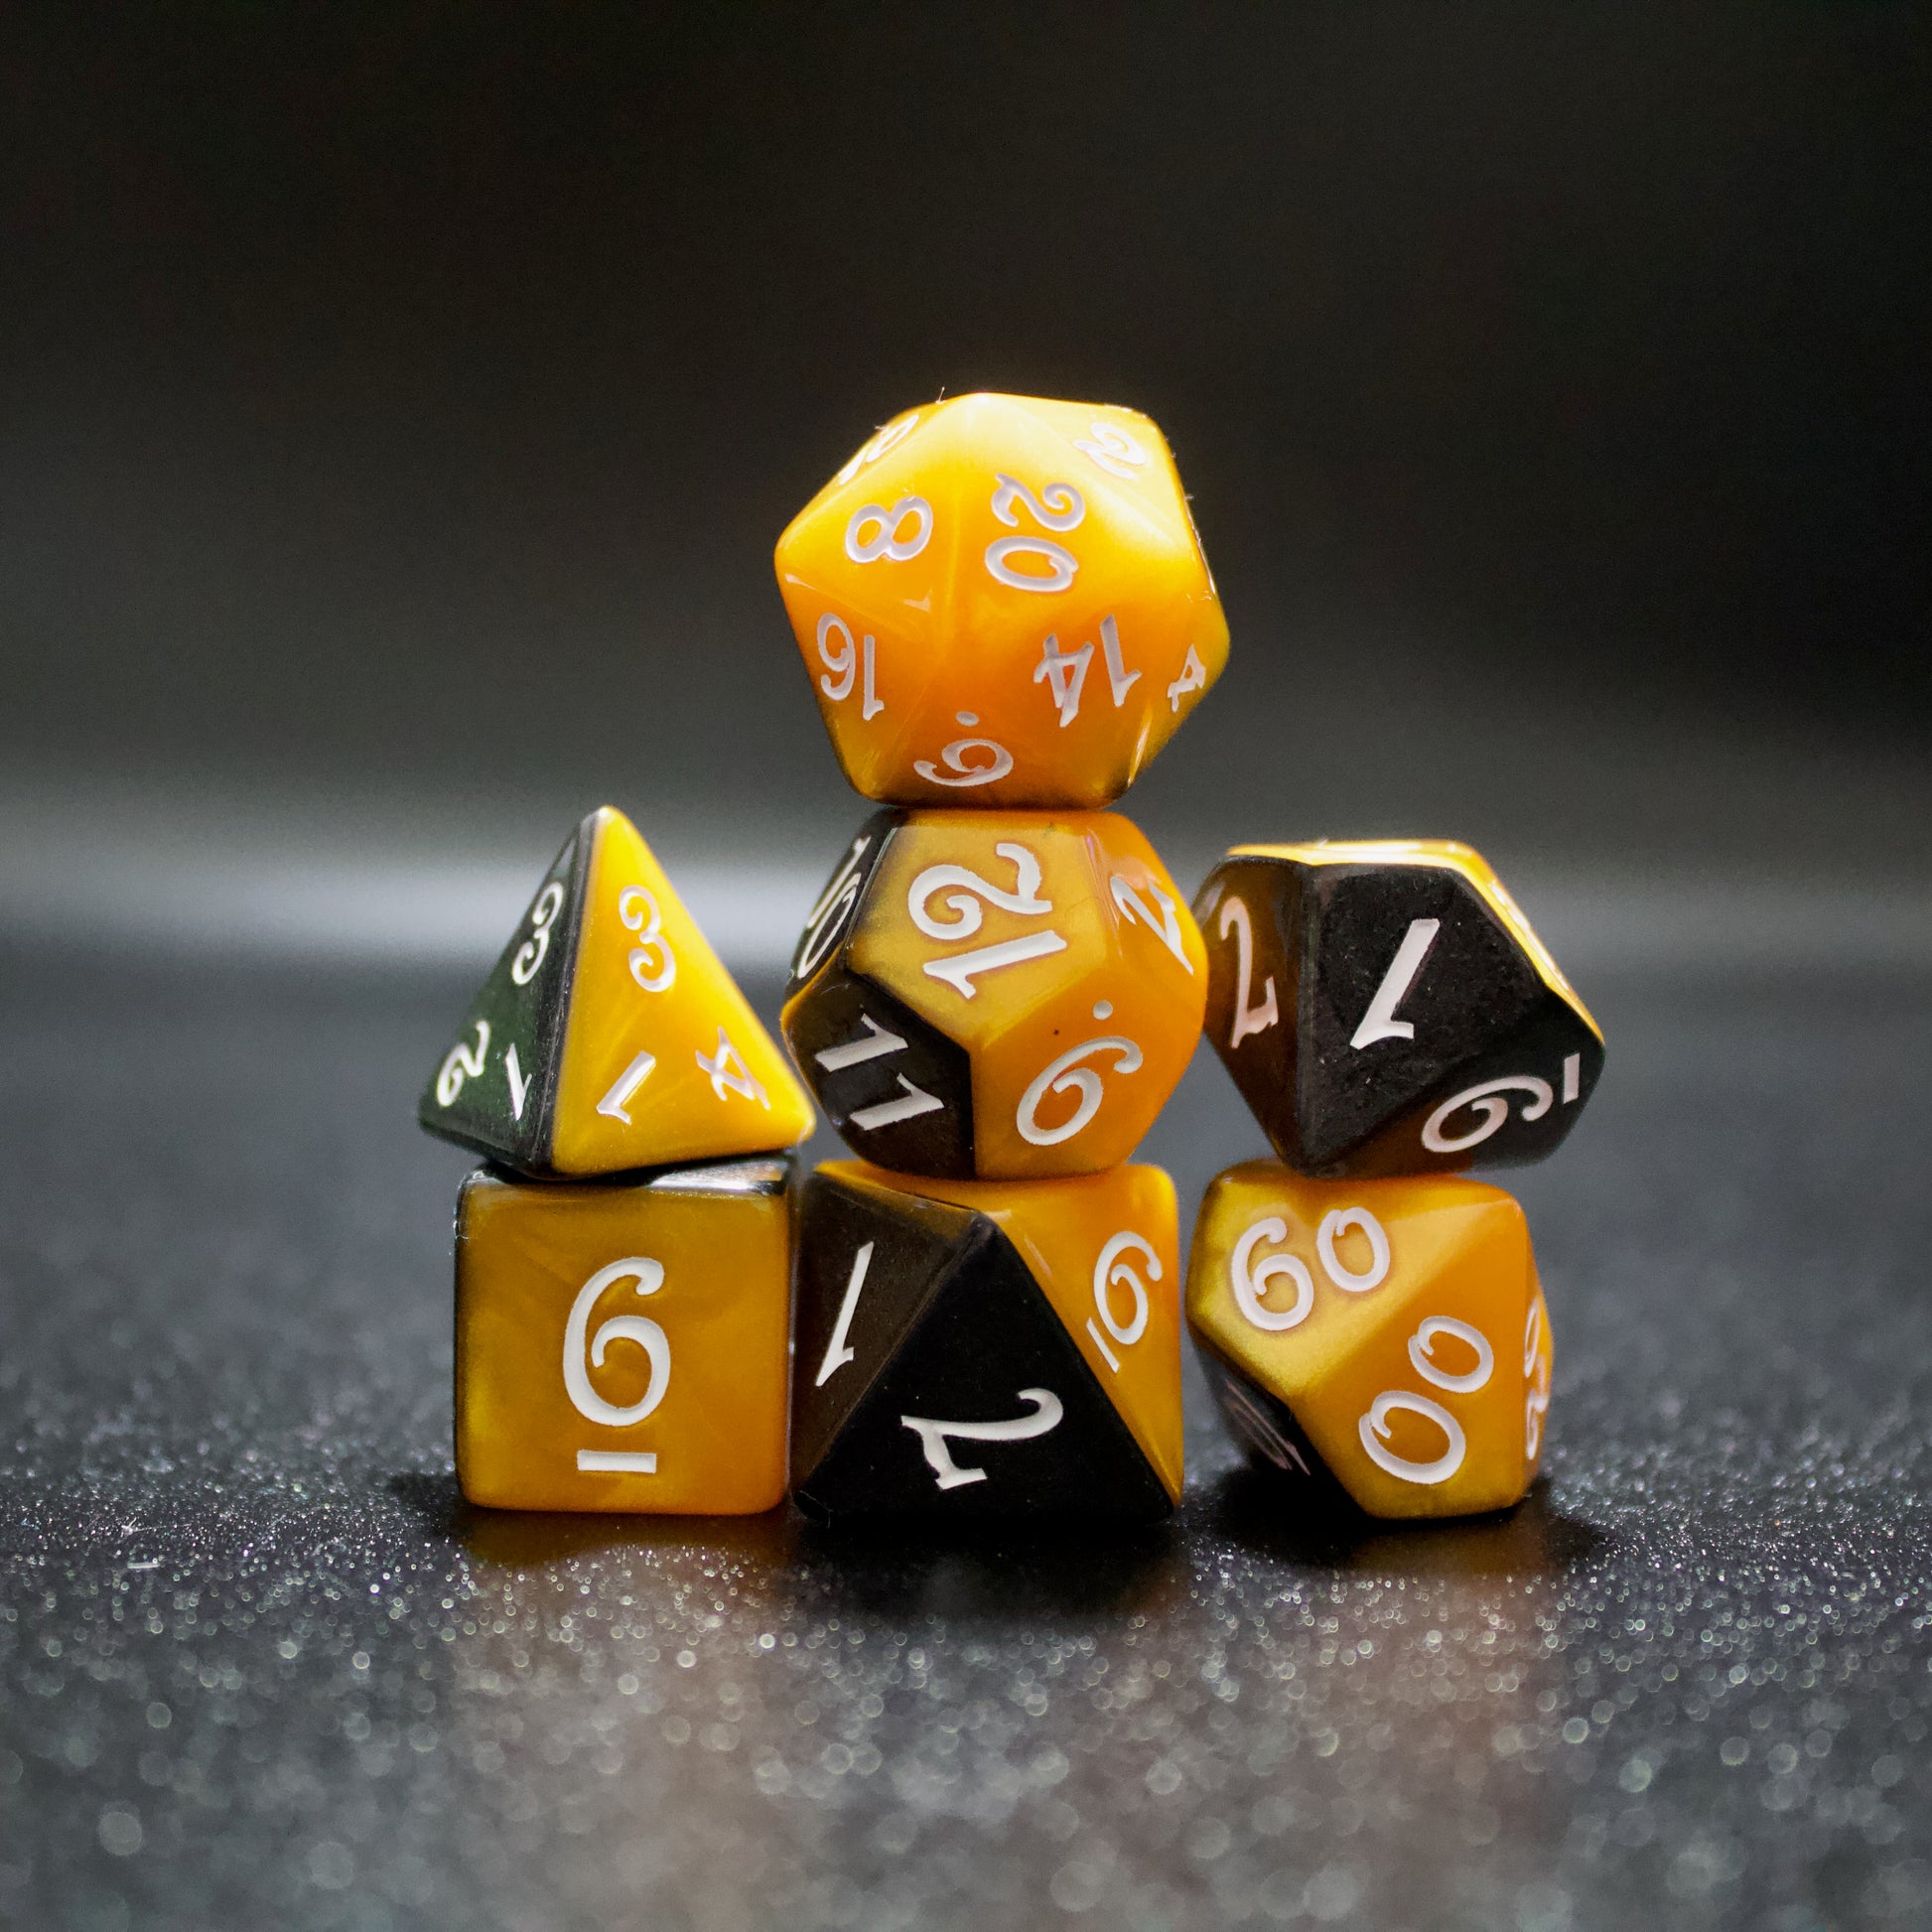 resin dnd dice sets for dungeons and dragons, role playing games and TTRPGs and dice goblin critter collectors